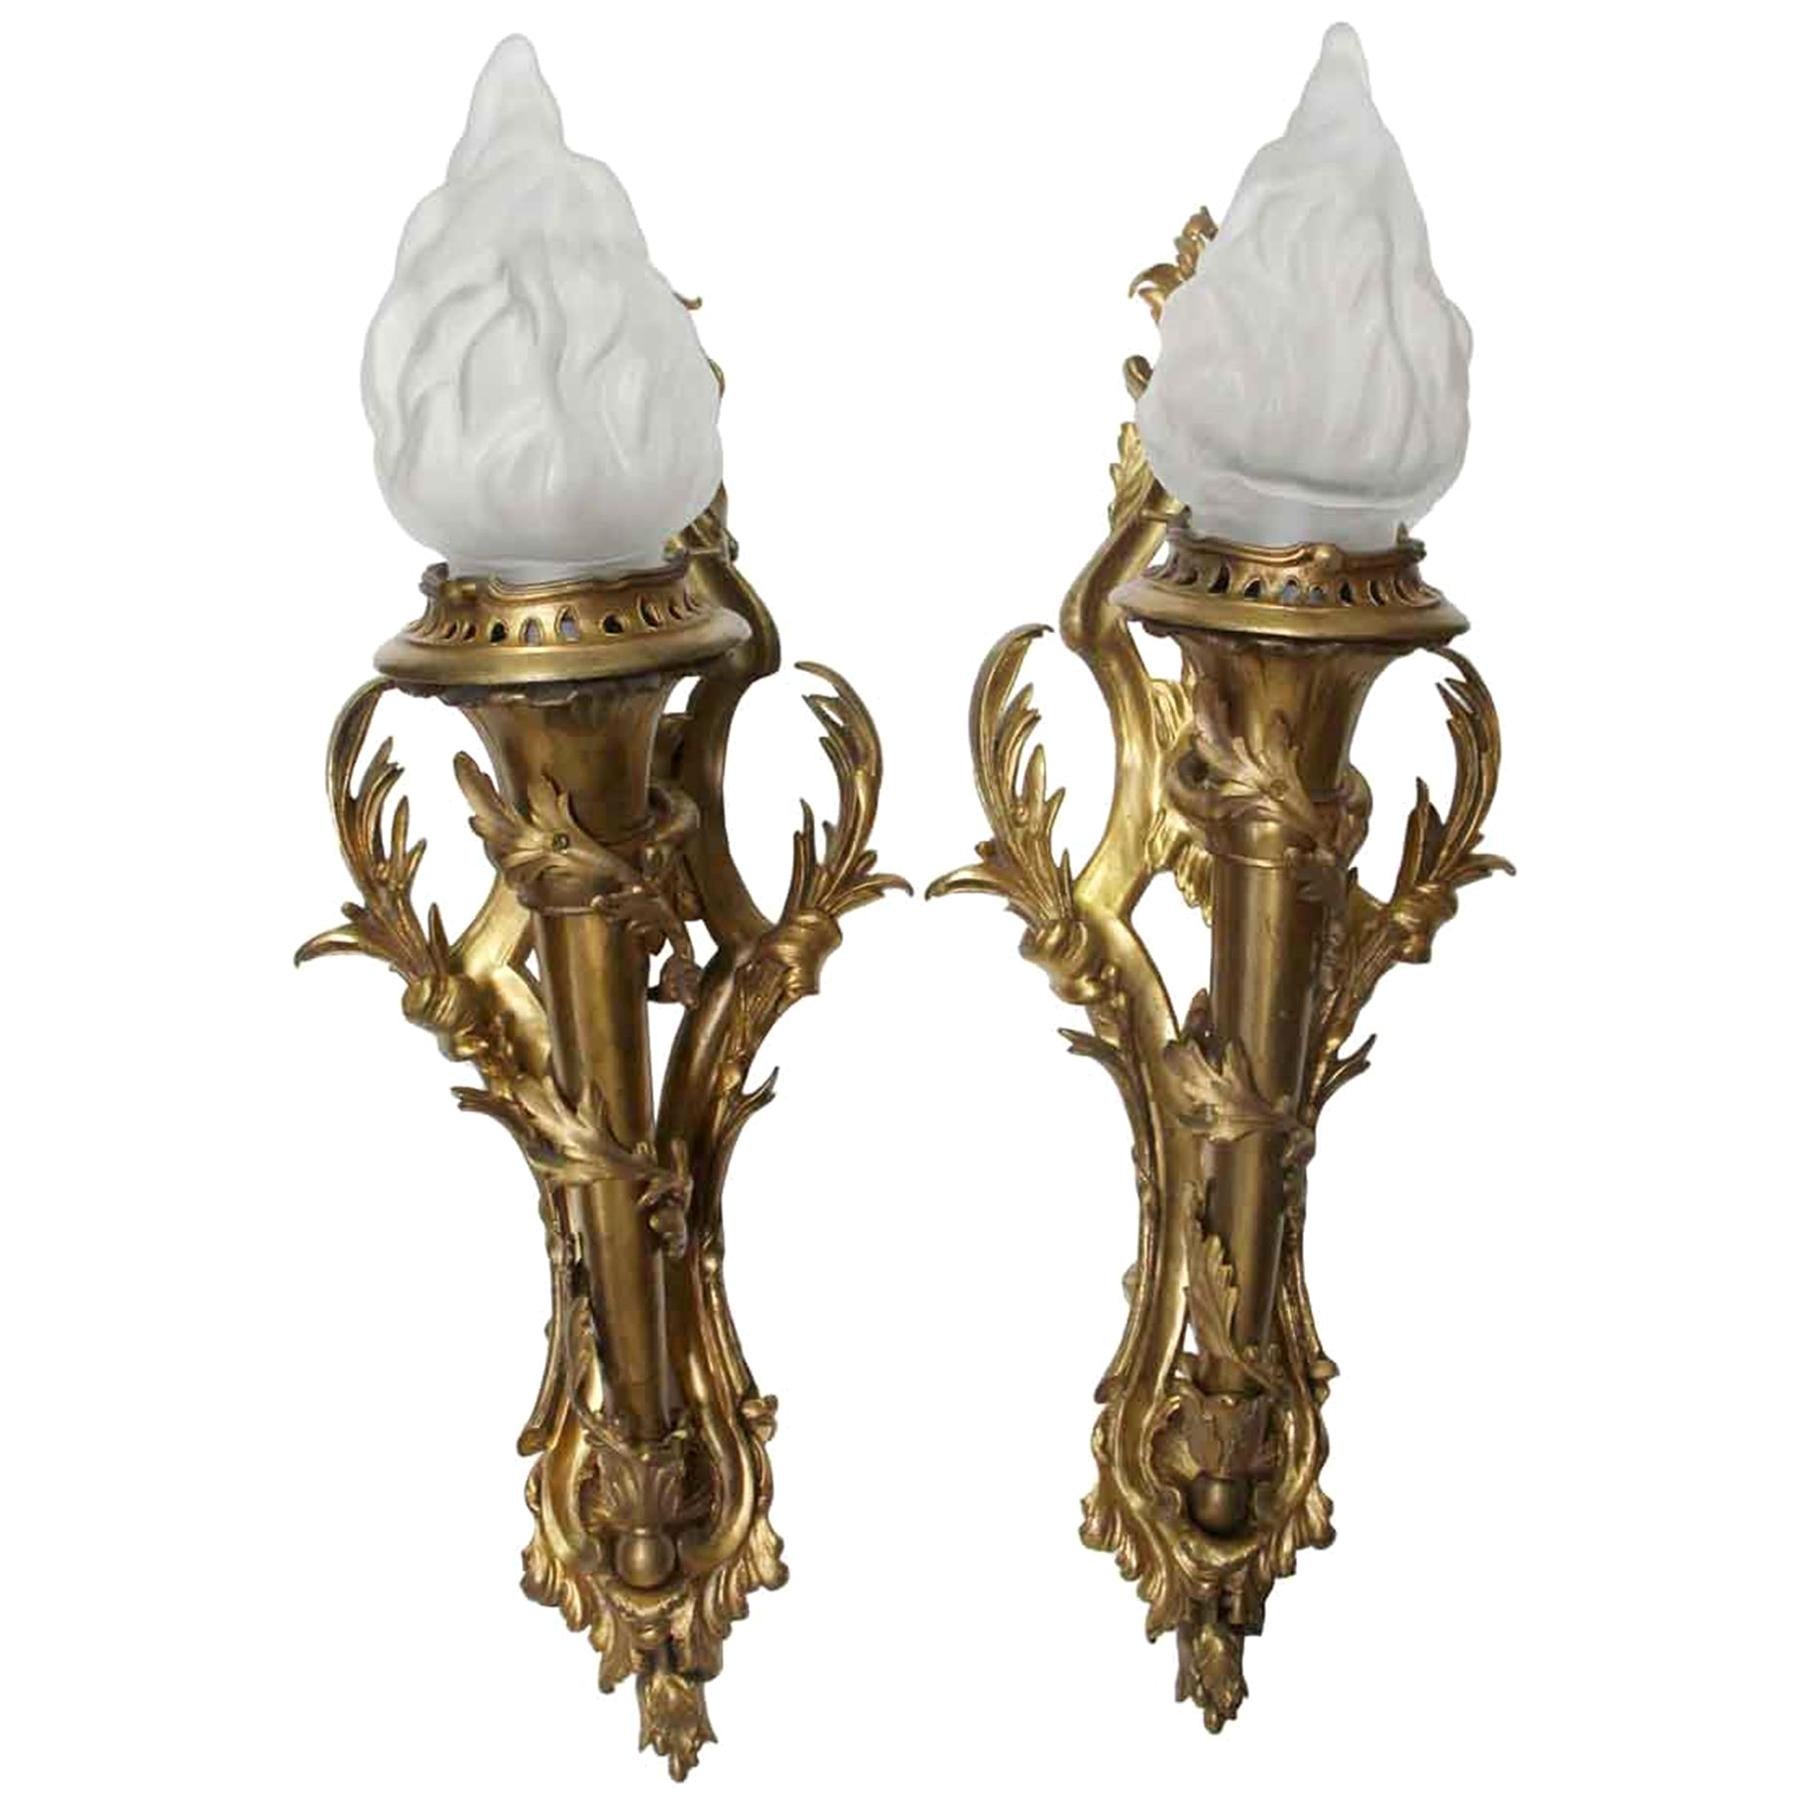 1920s Pair of Bronze Ornate Sconces with Glass Torch Shades